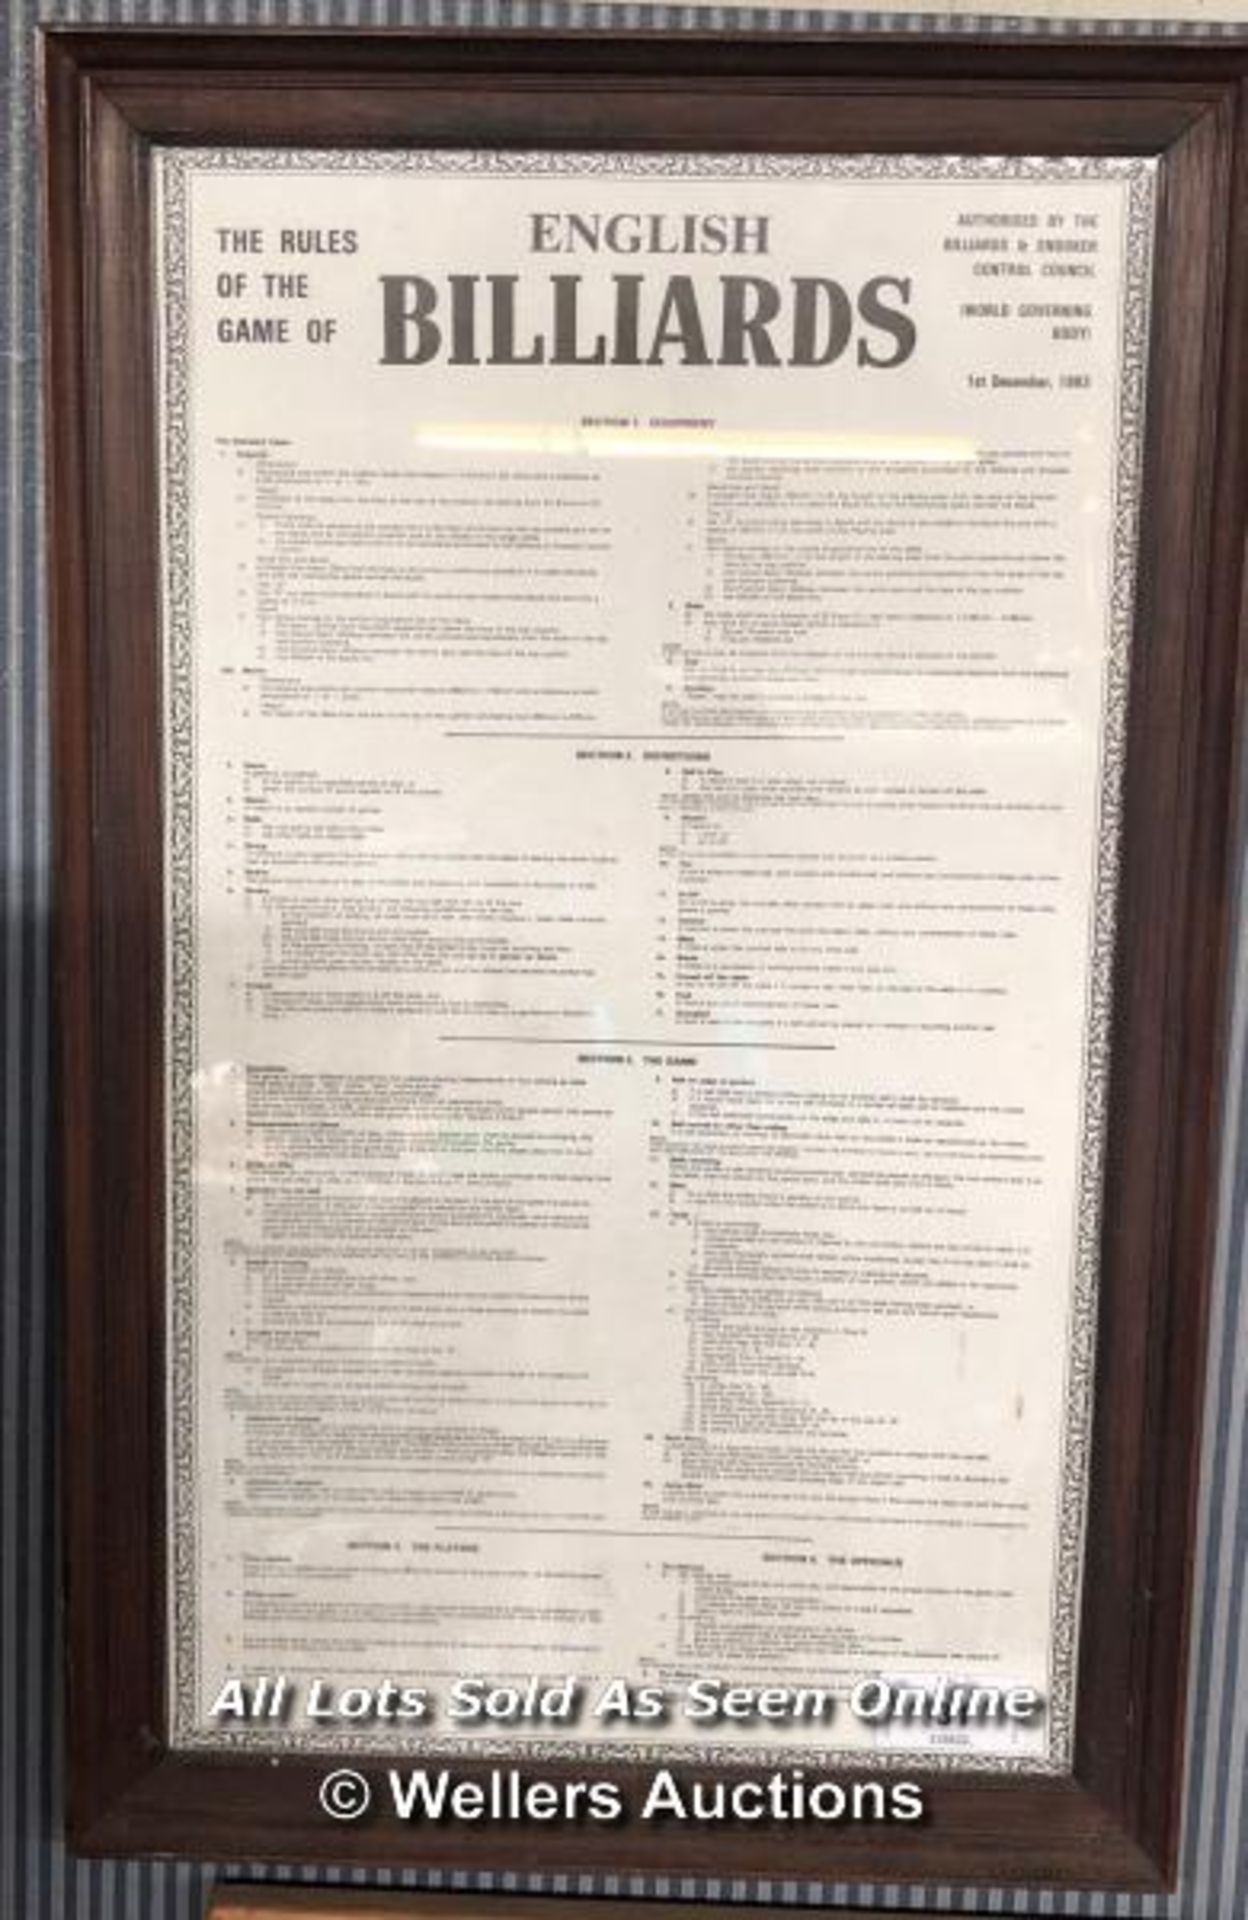 "THE RULES OF THE GAME OF ENGLISH BILLIARDS" FRAMED RULES IN HANGING PICTURE FRAME, AUTHORISED BY